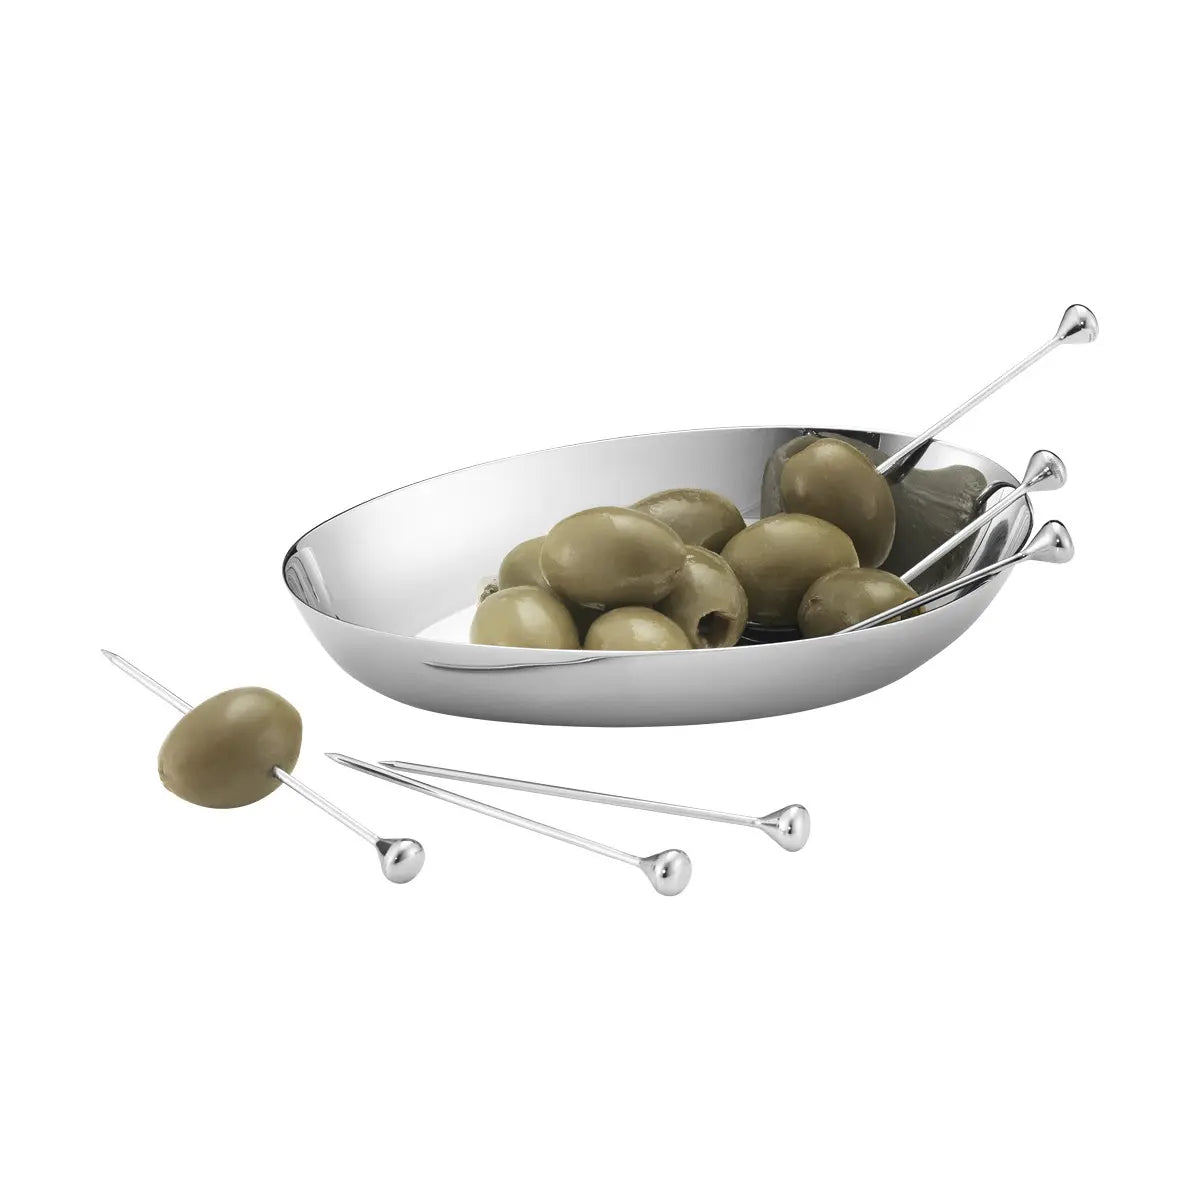 Georg Jensen Stainless Steel 6 piece Sky Food Cocktail Sticks with olives